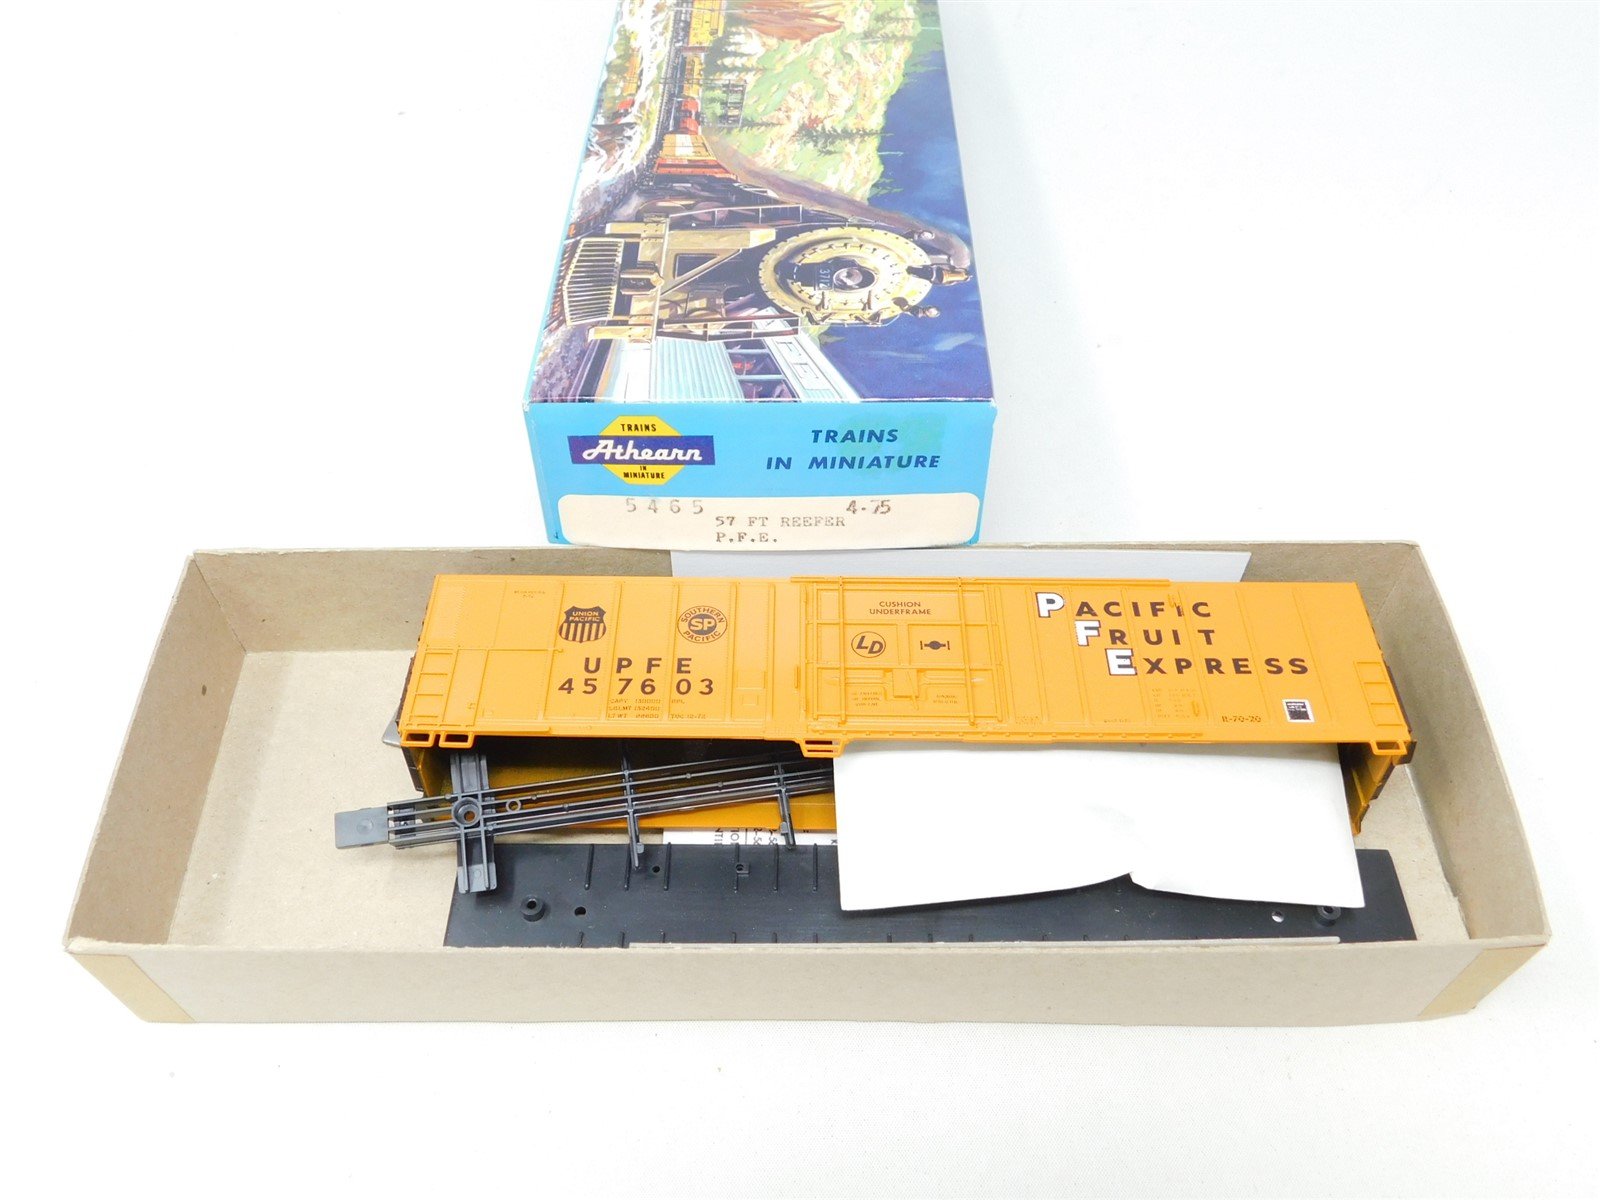 HO Scale Athearn Kit 5465 UPFE SP Pacific Fruit Express 57' Mech Reefer #457603